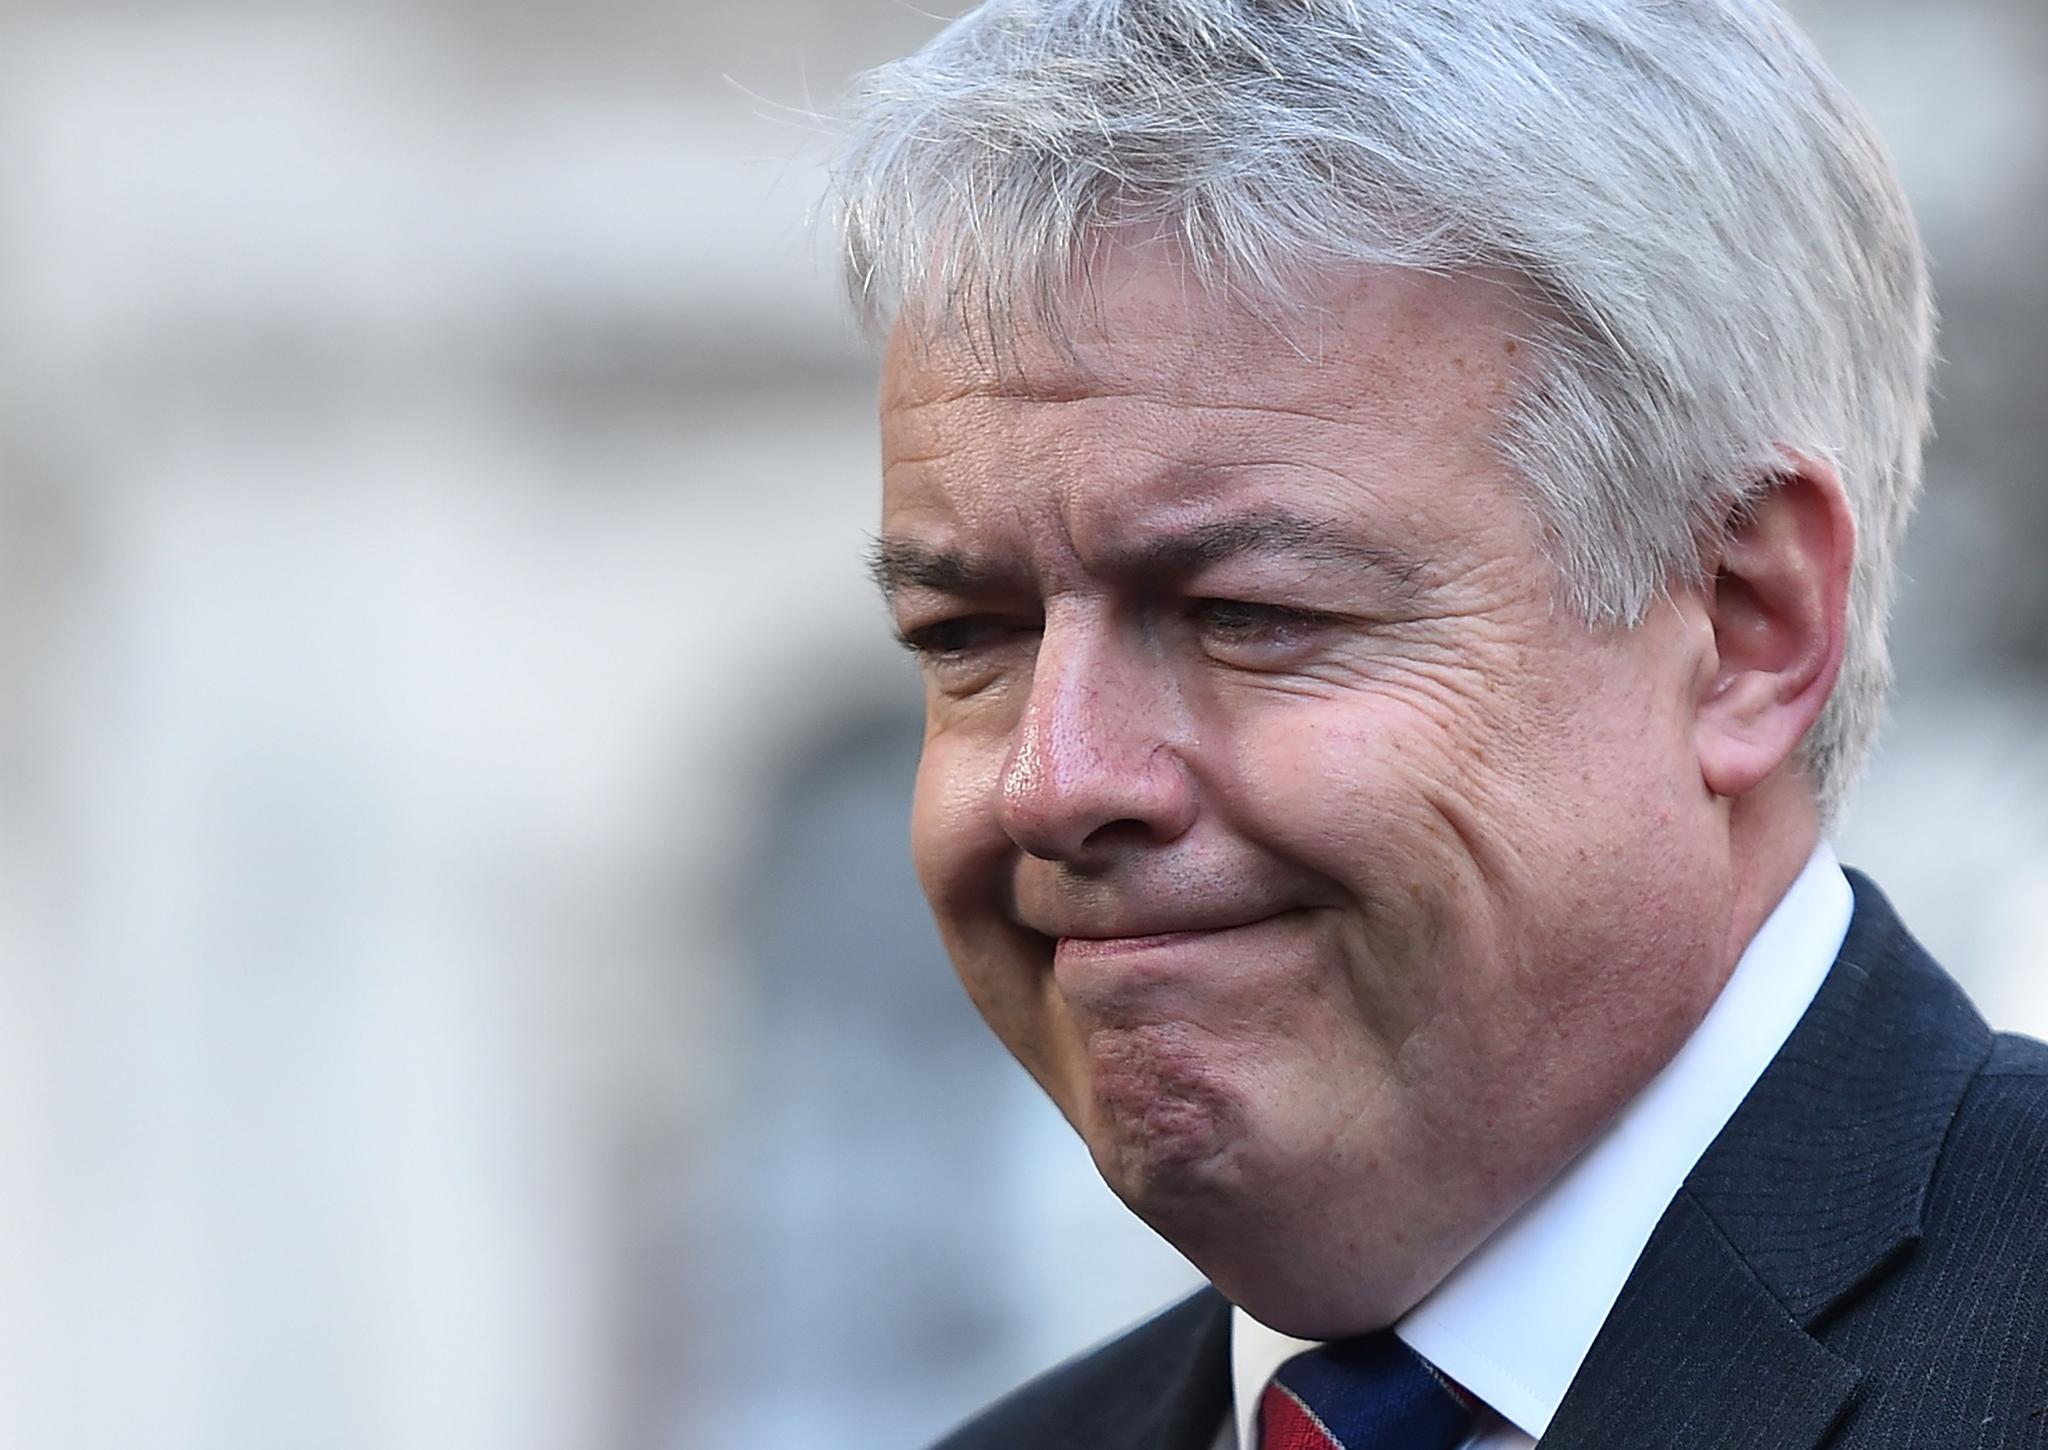 Carwyn Jones said priority in the Brexit negotiations must be maximum access to the single market